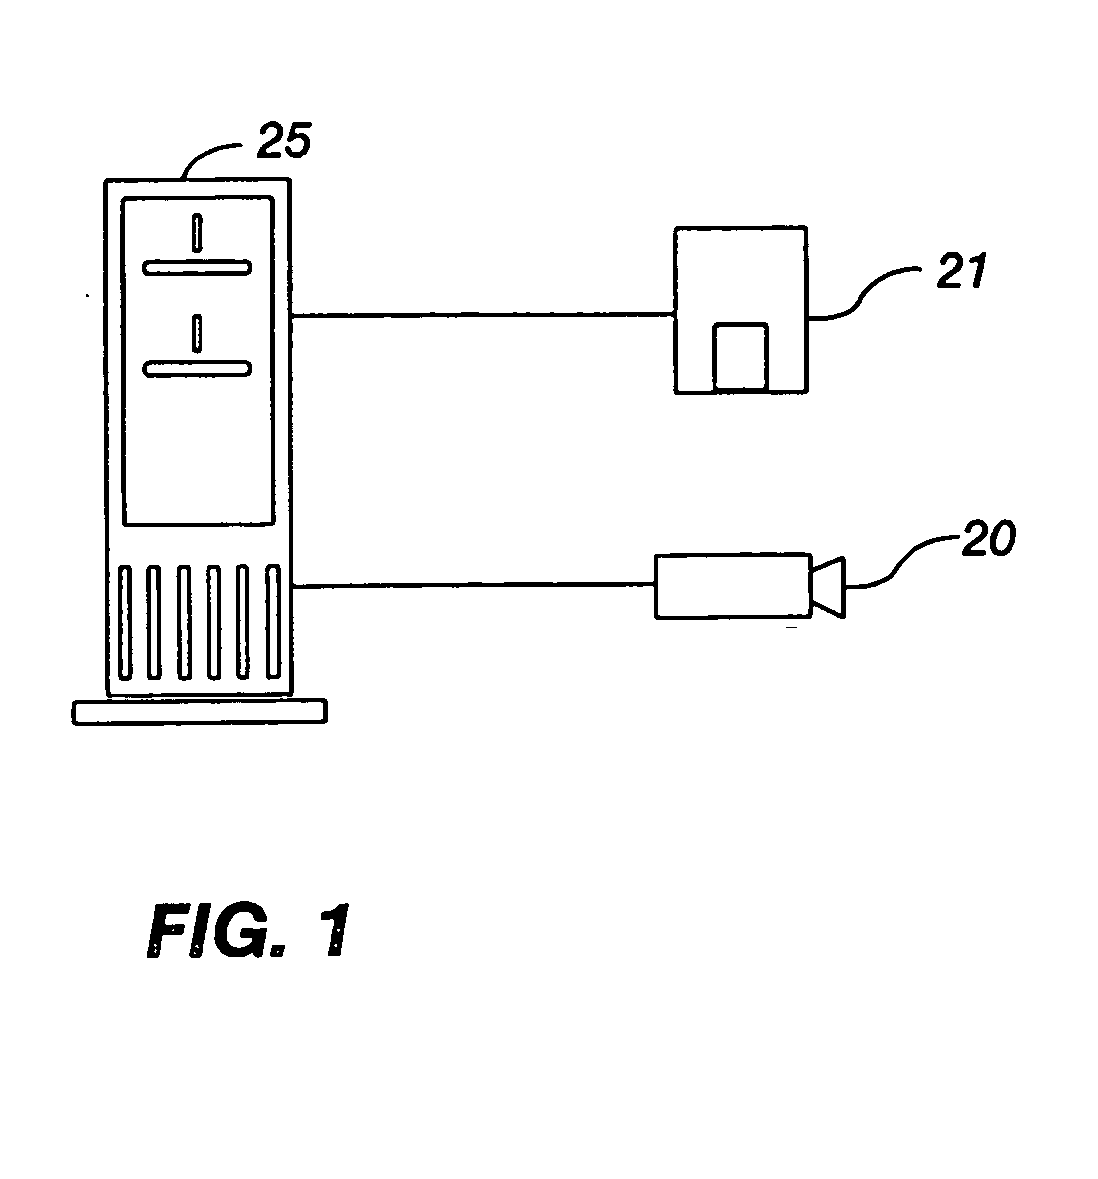 Identity verification system with interoperable and interchangeable input devices